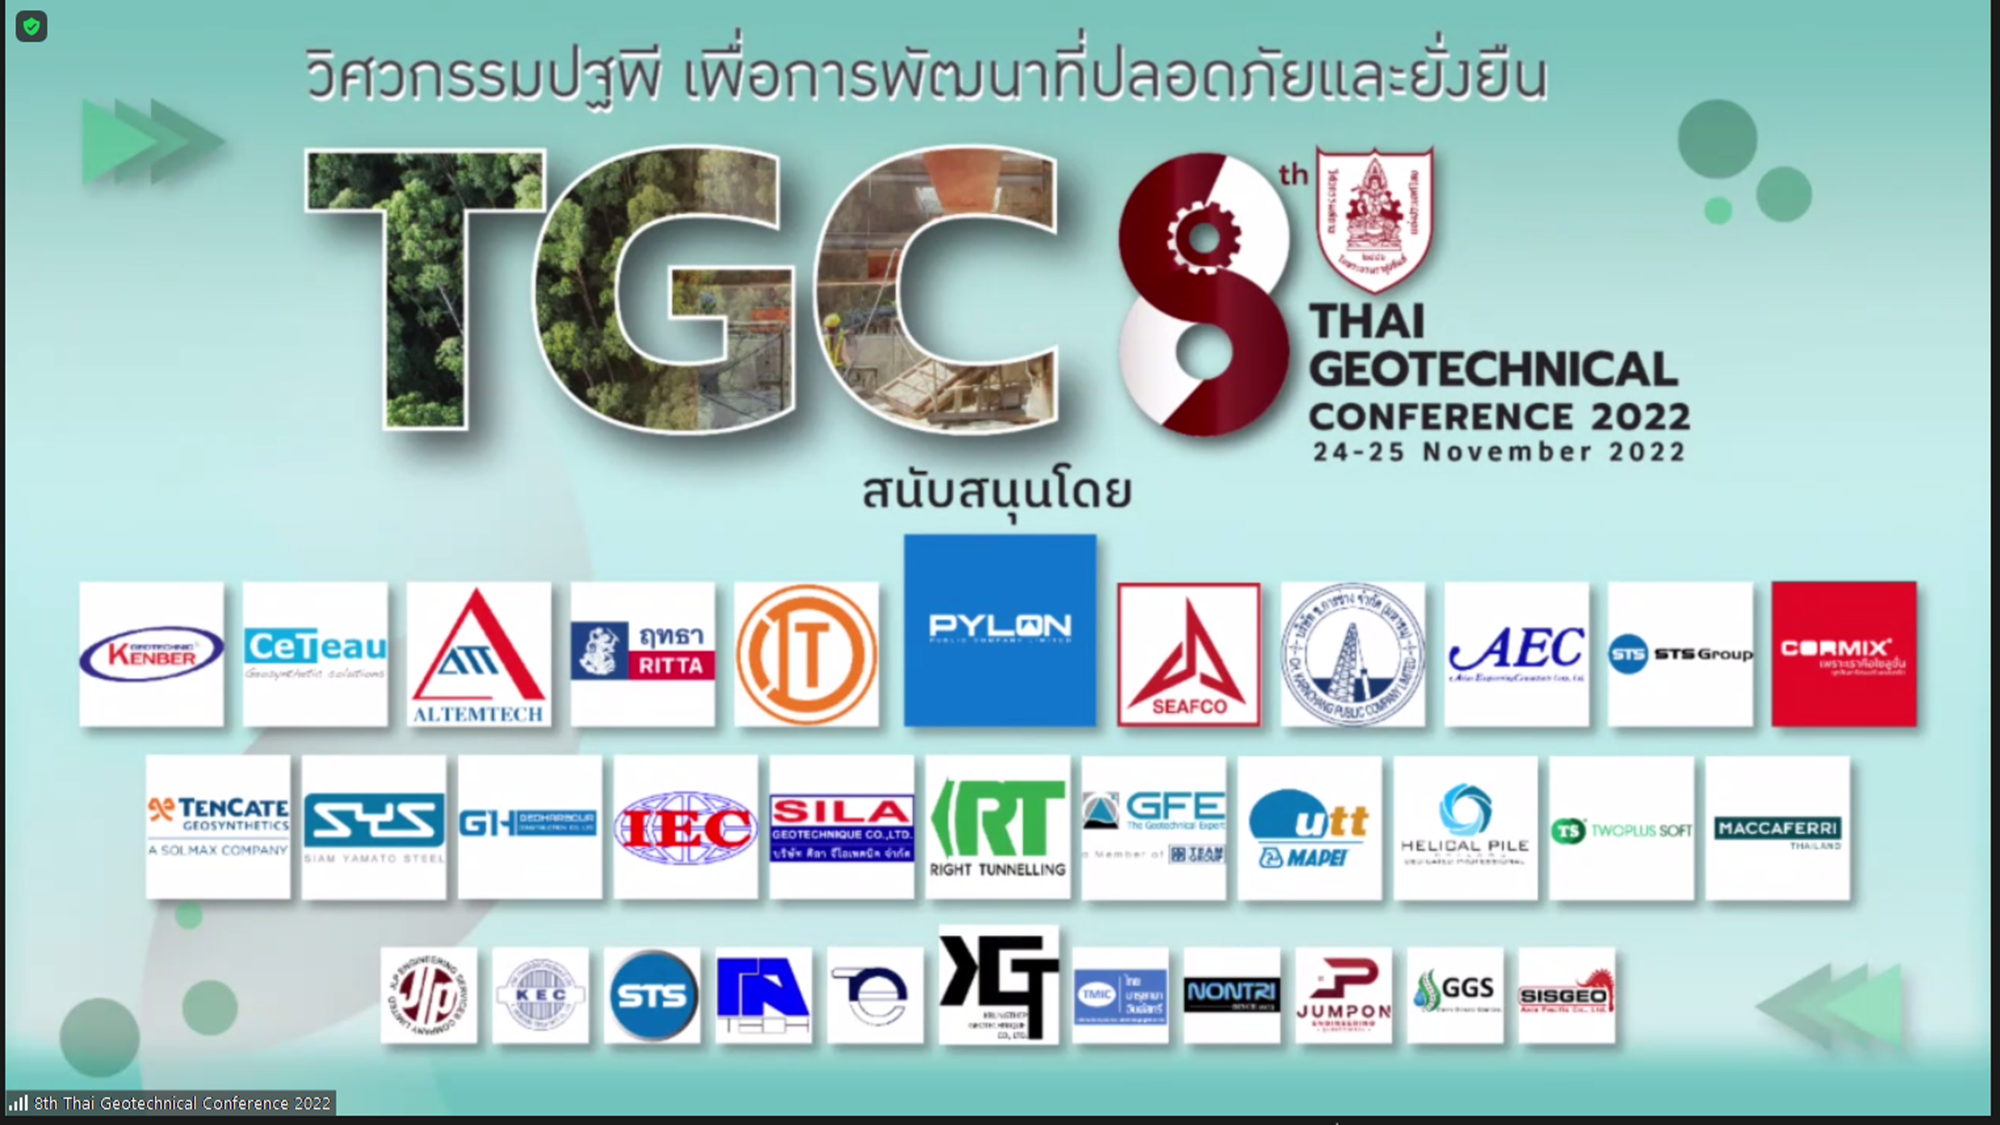 8th Thai Geotechnical Conference Webinar 2022